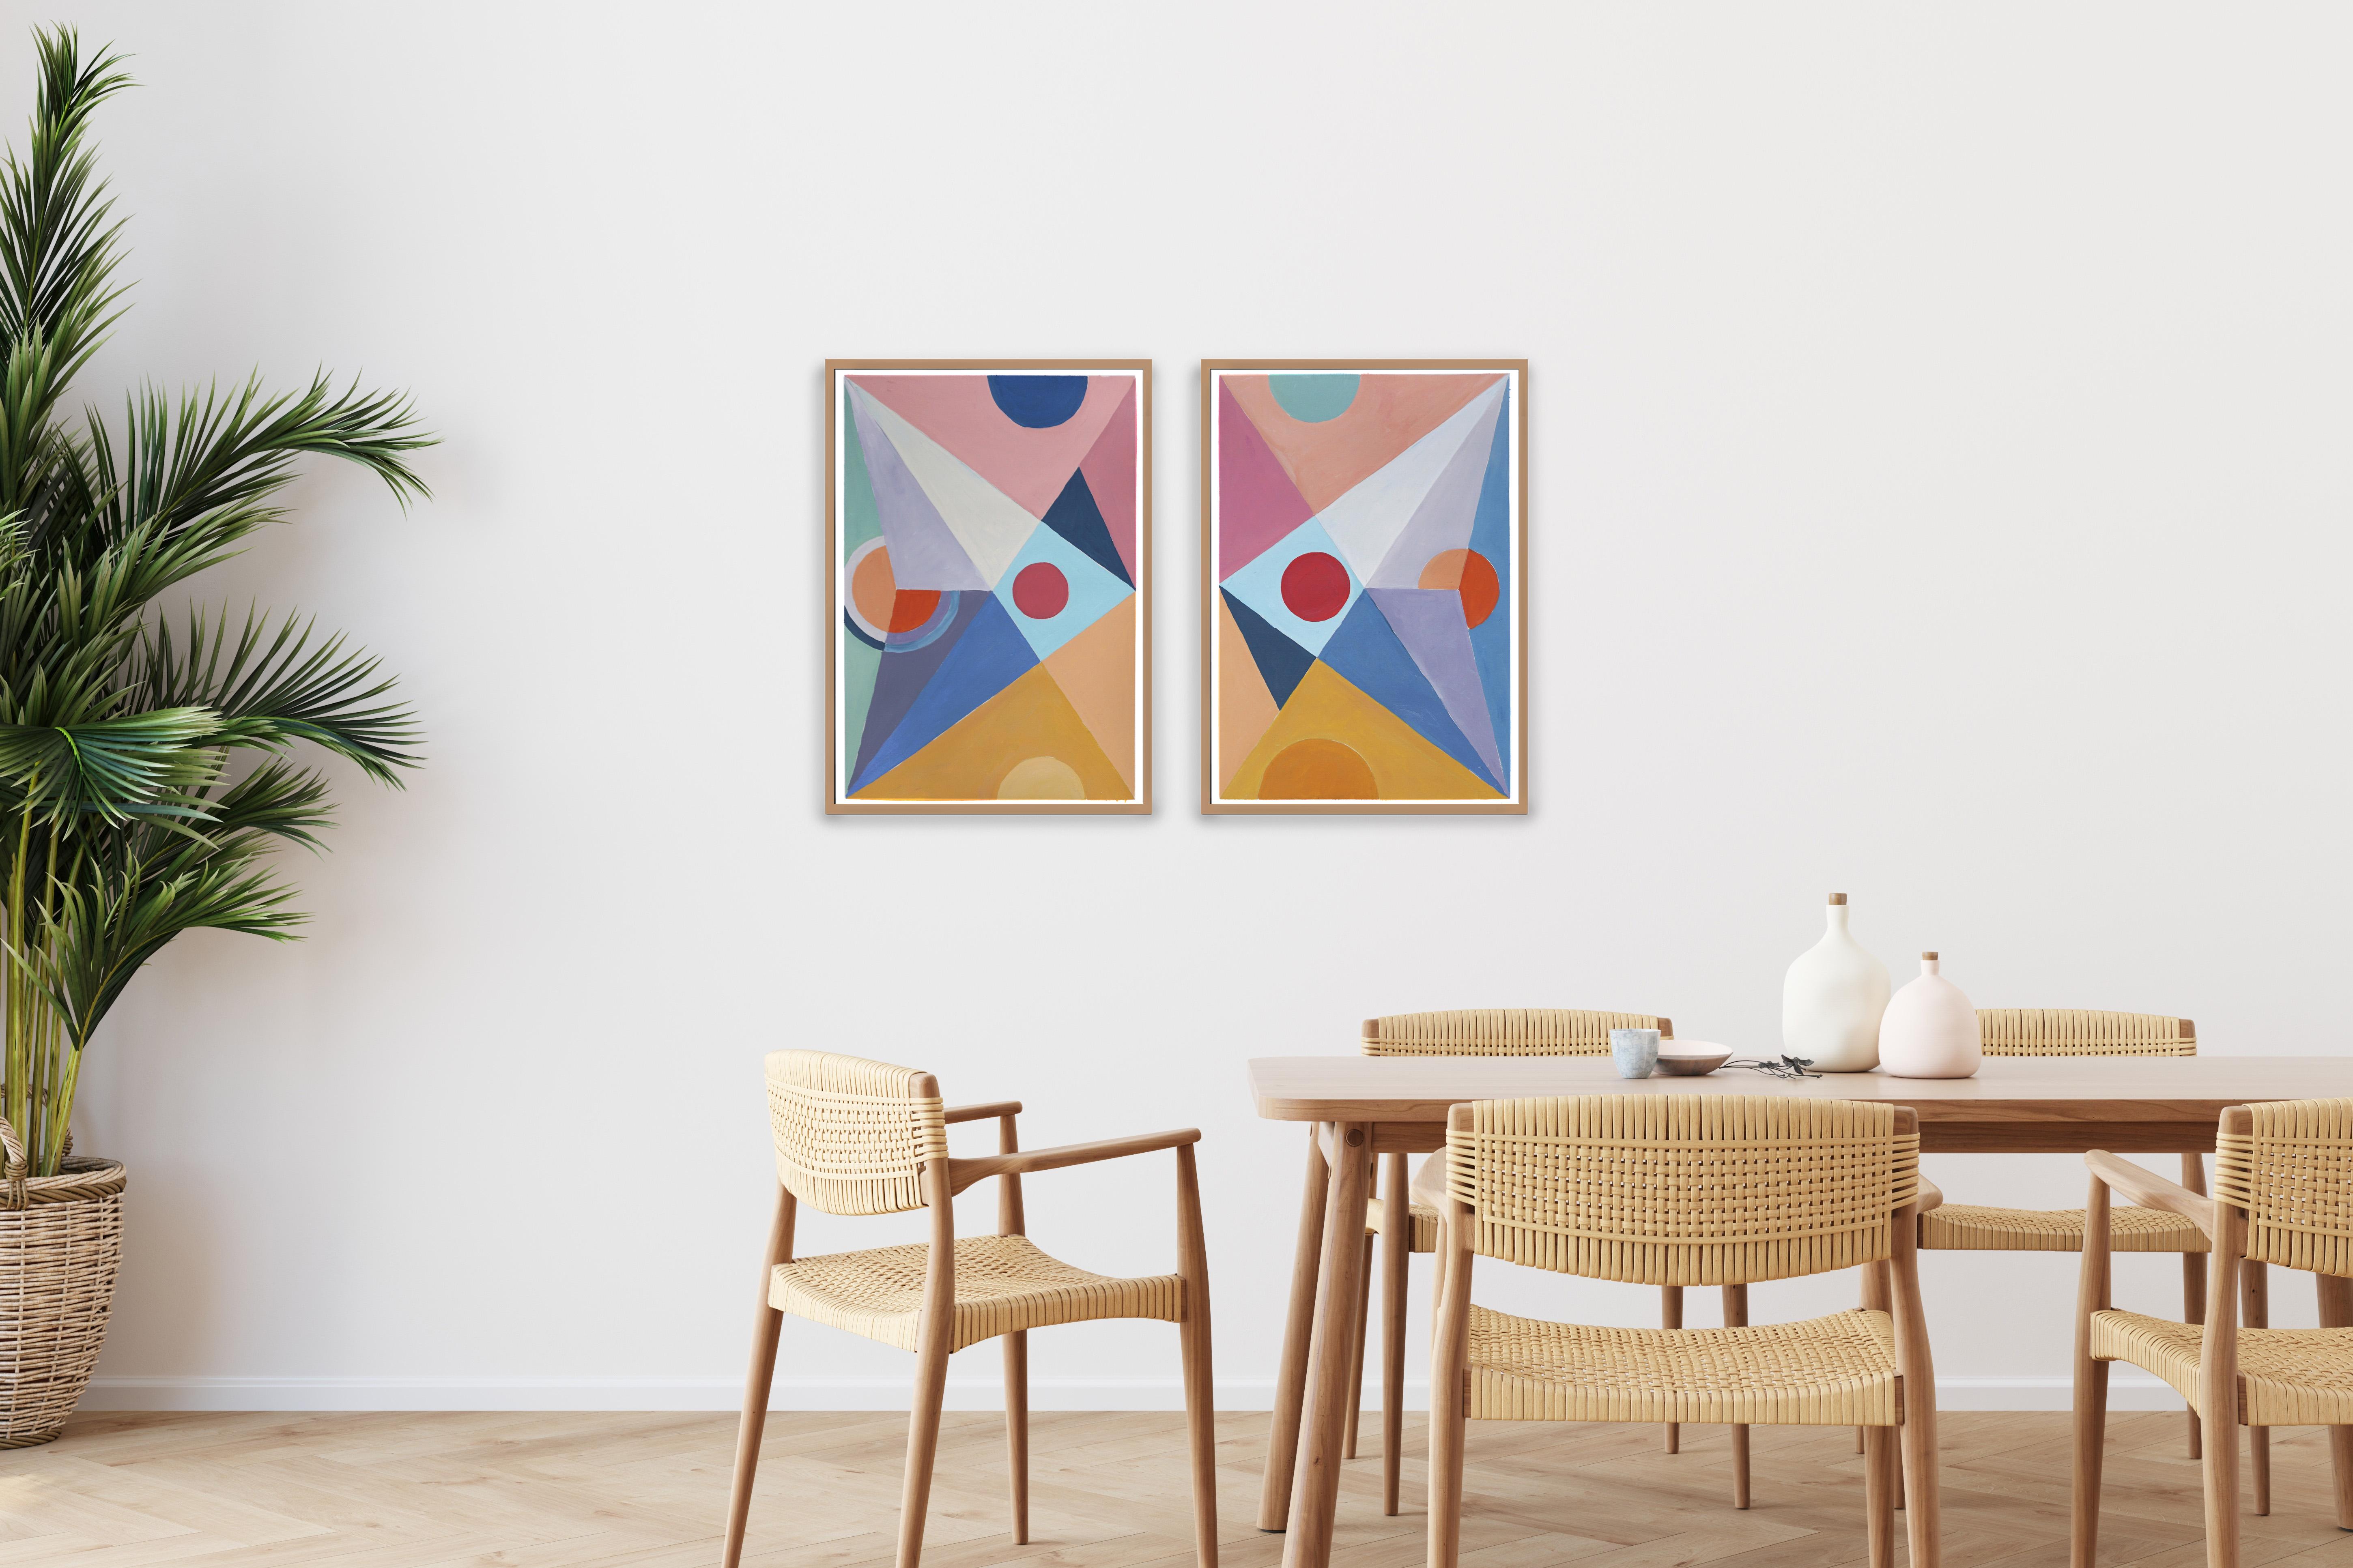 Parted Future Mirage, Geometric Shapes, Suprematist Diptych, Yellow, Gray & Pink - Constructivist Painting by Natalia Roman